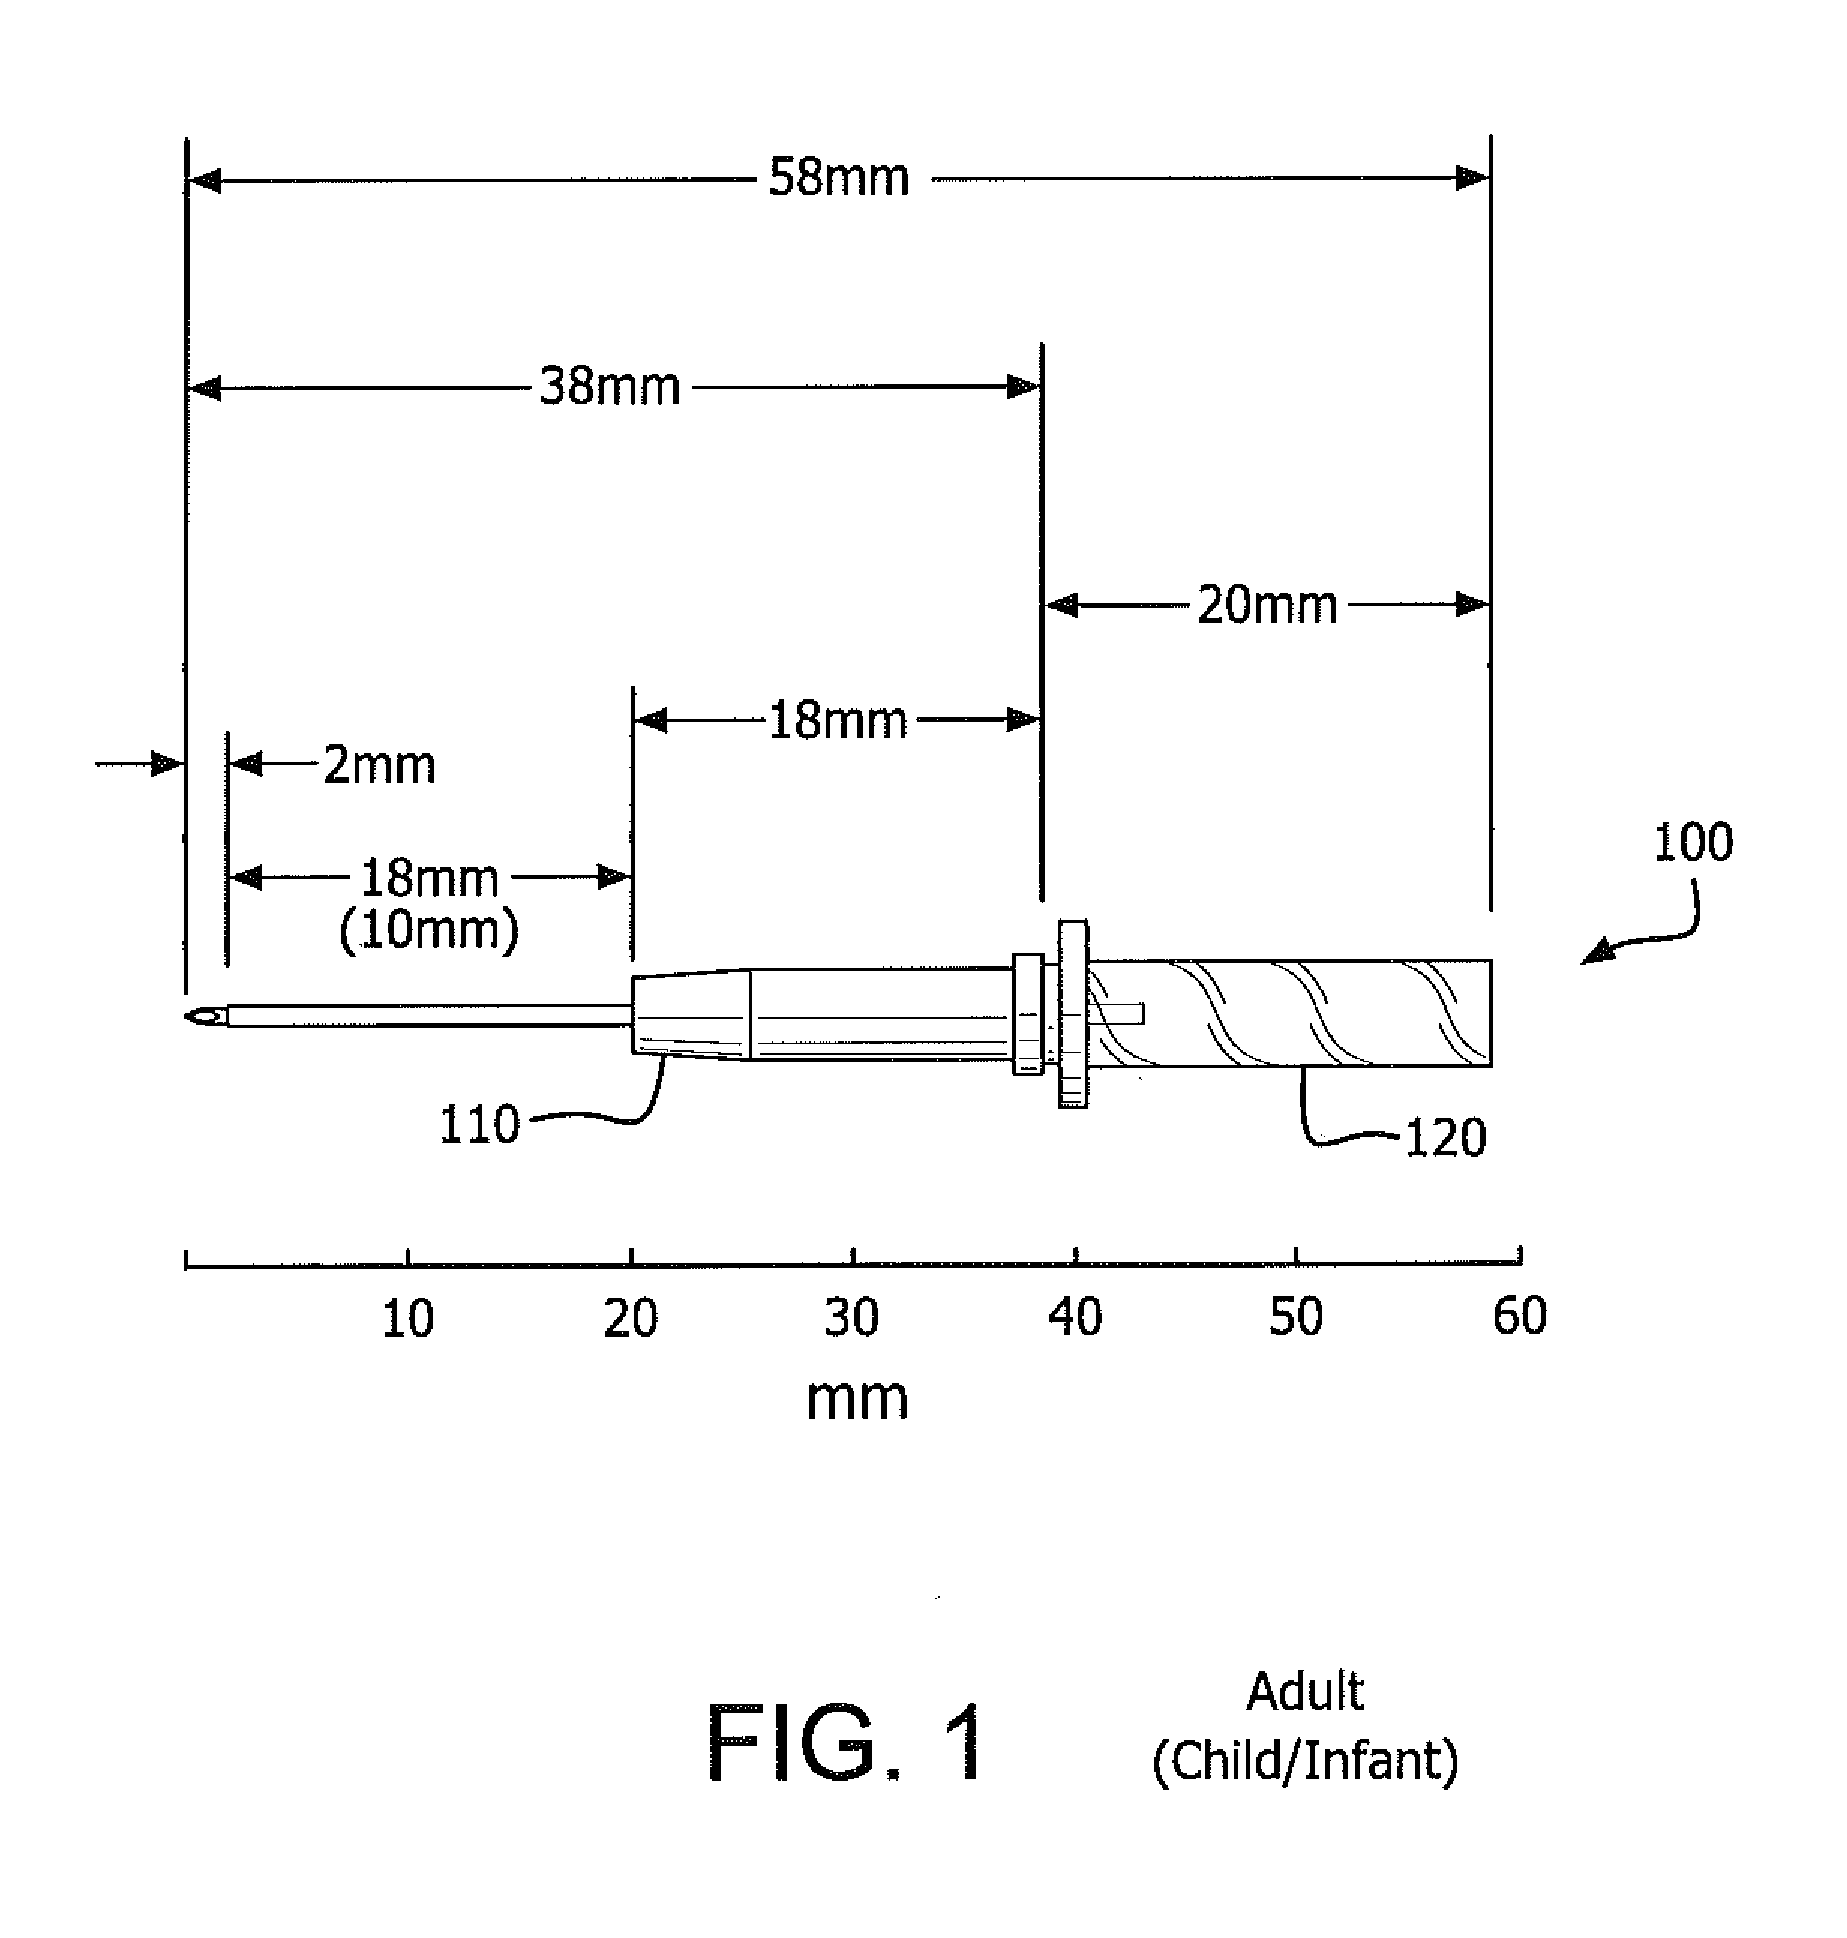 Method and Apparatus for Continuous Monitoring of Exhaled Carbon Dioxide